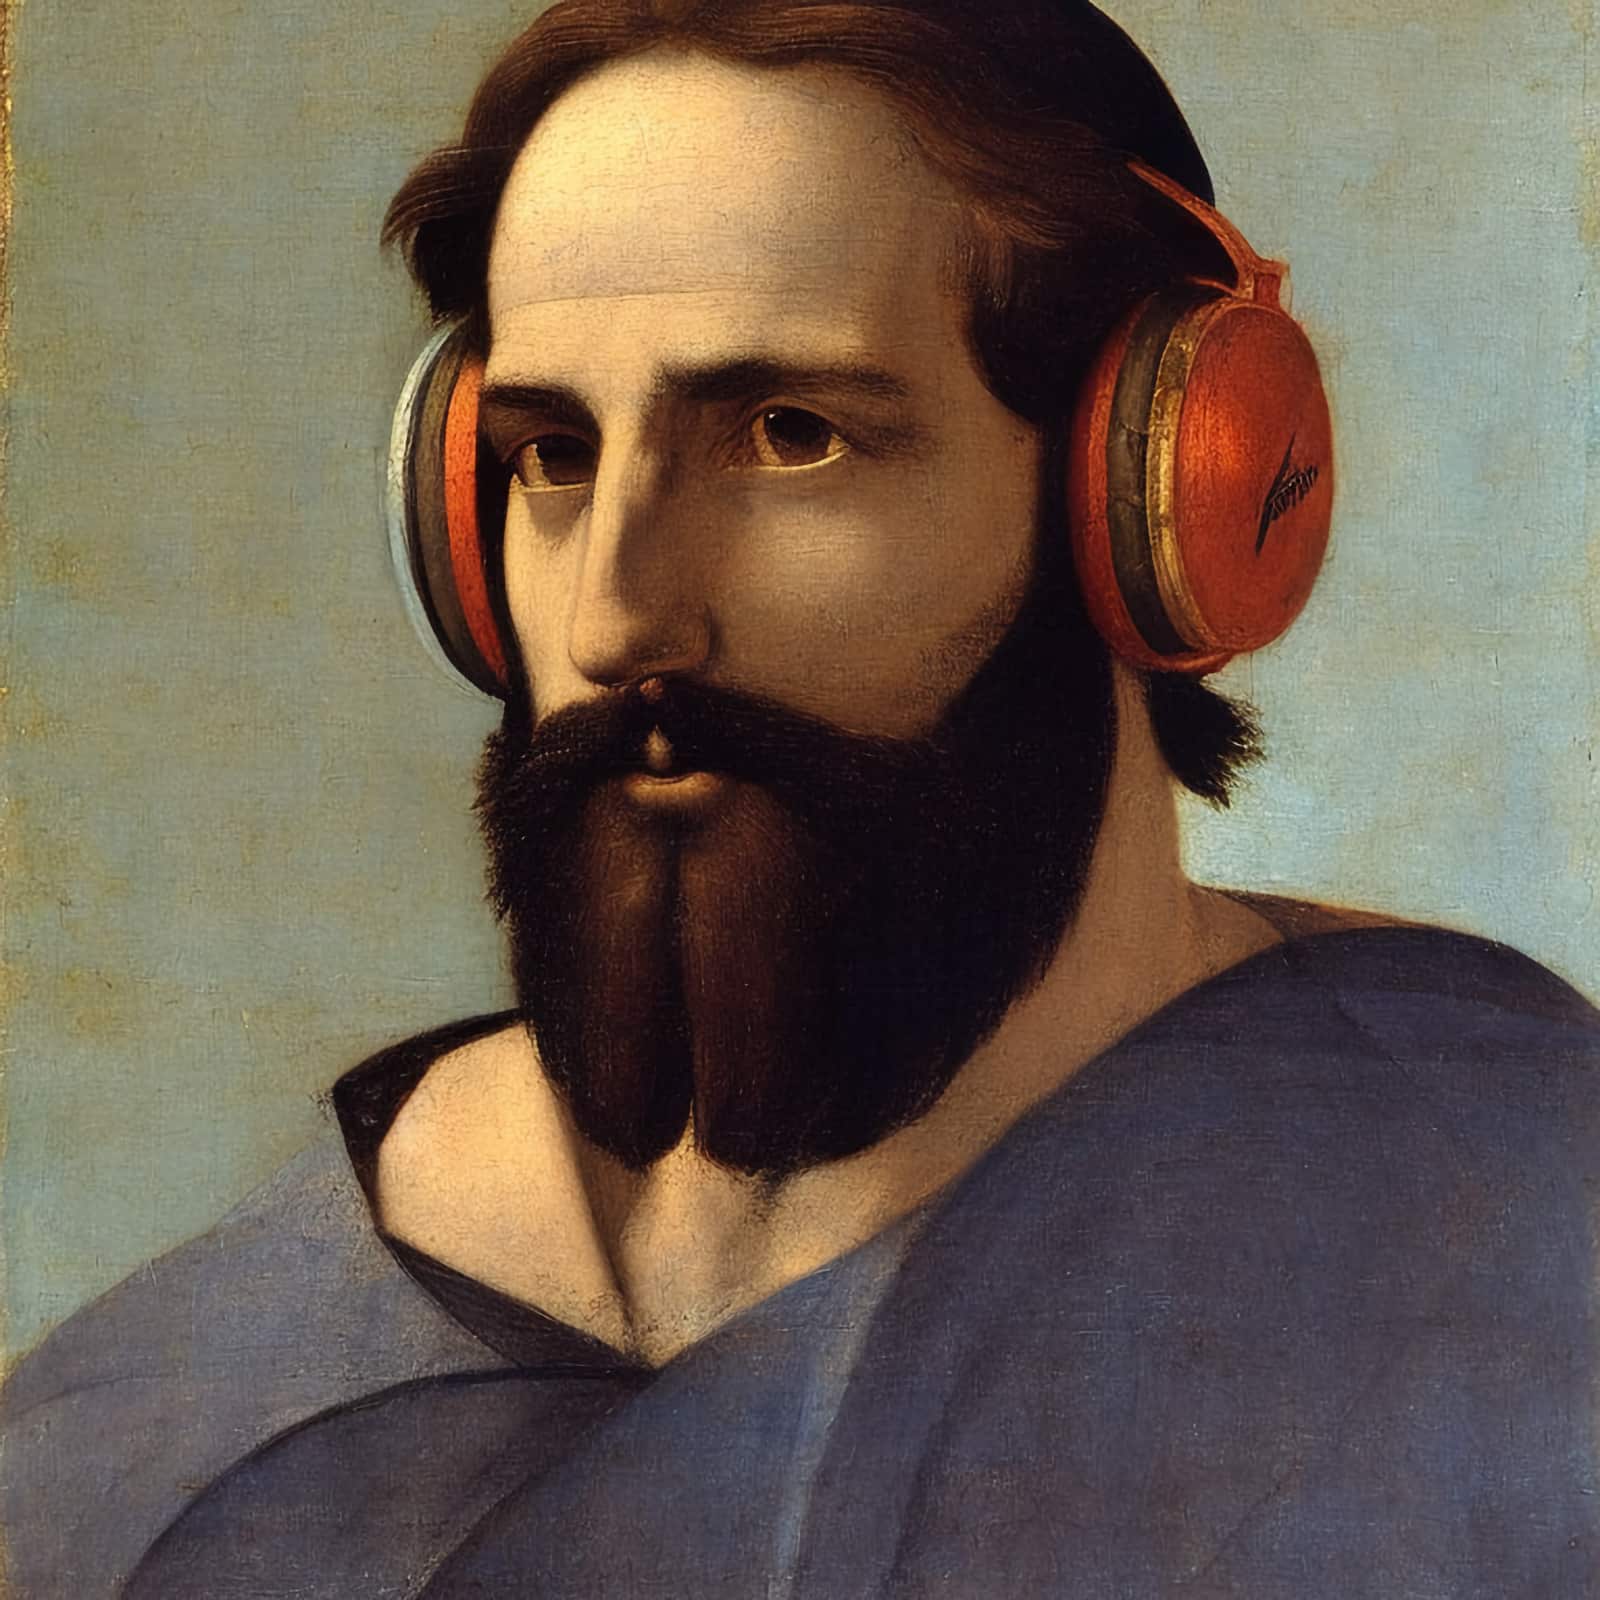 Raphael's Man With Headphones - not really. AI!